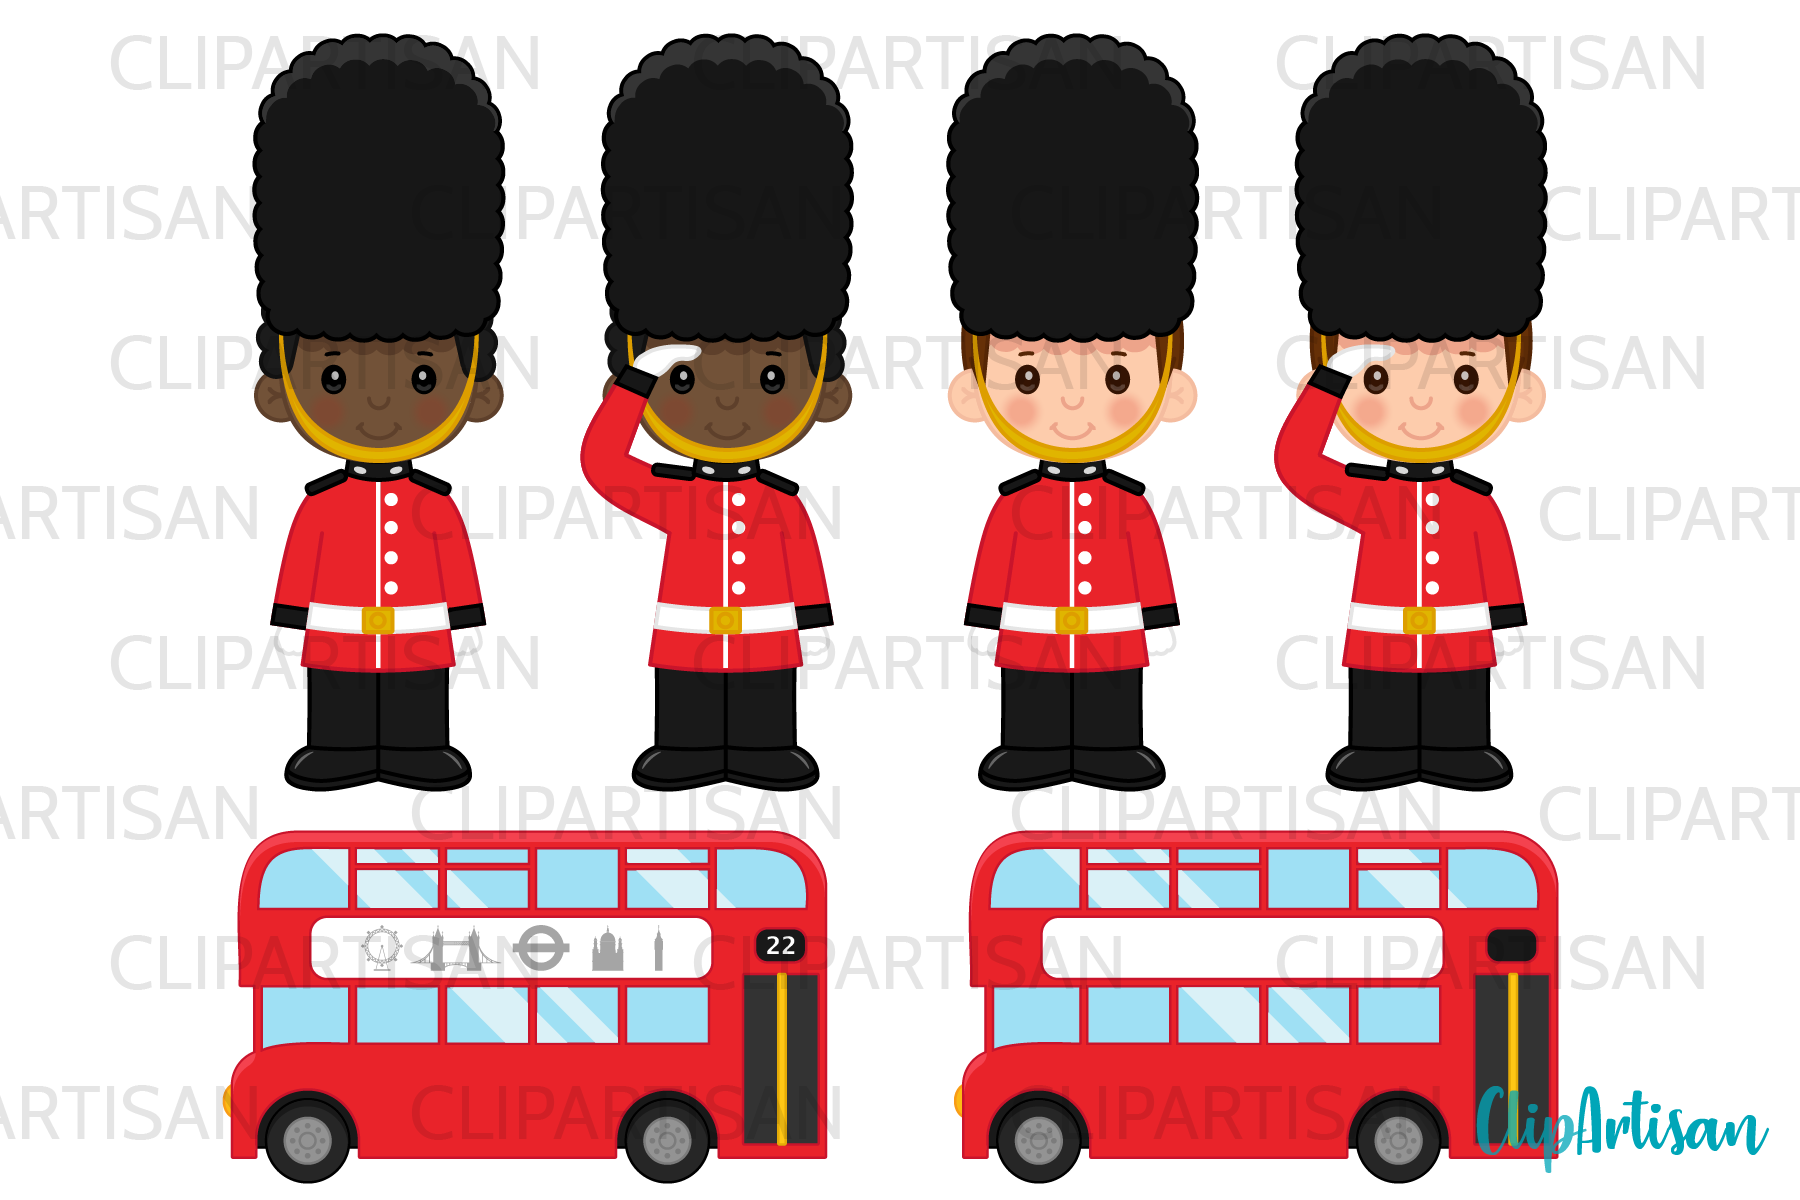 British Clipart London Clipart England Clipart Collage Sheets Visual ...